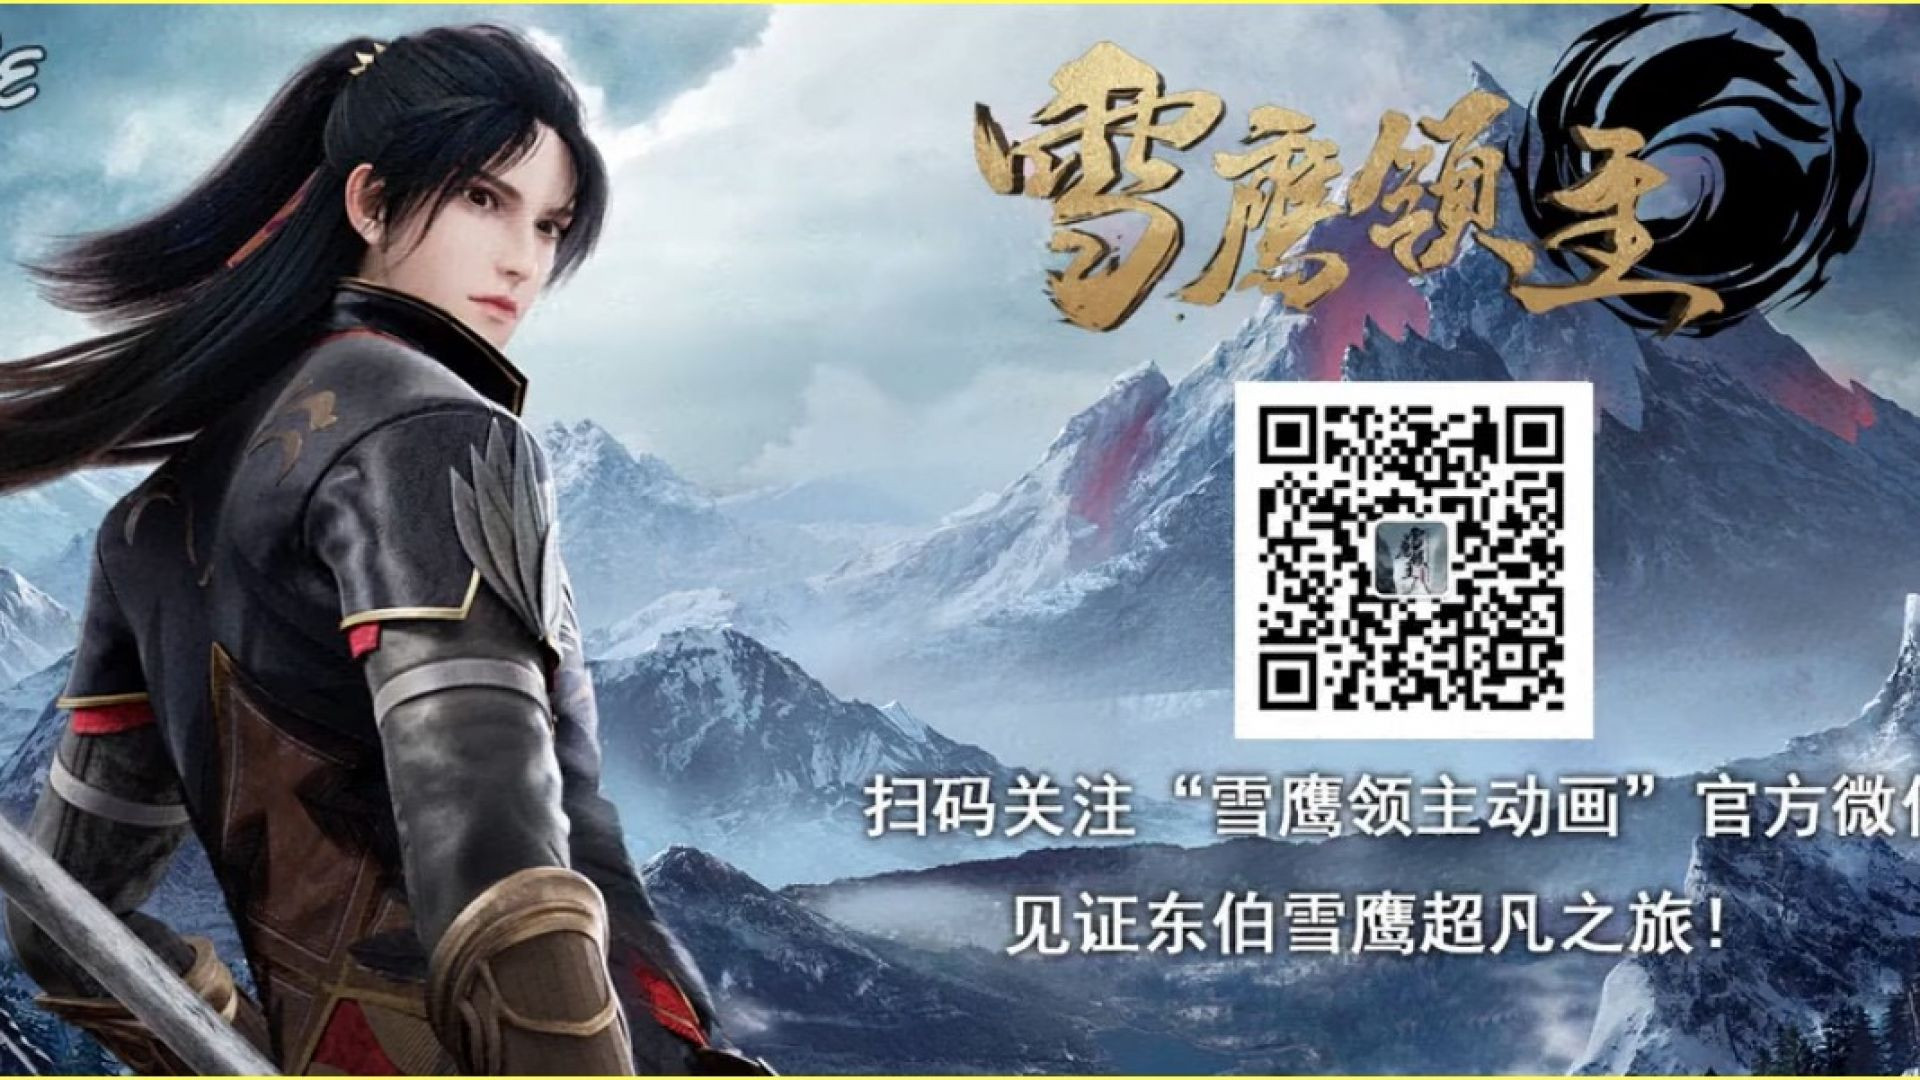 ⁣[MDH] Lord Xue Ying Spesial Adventures E01 Sub Indo